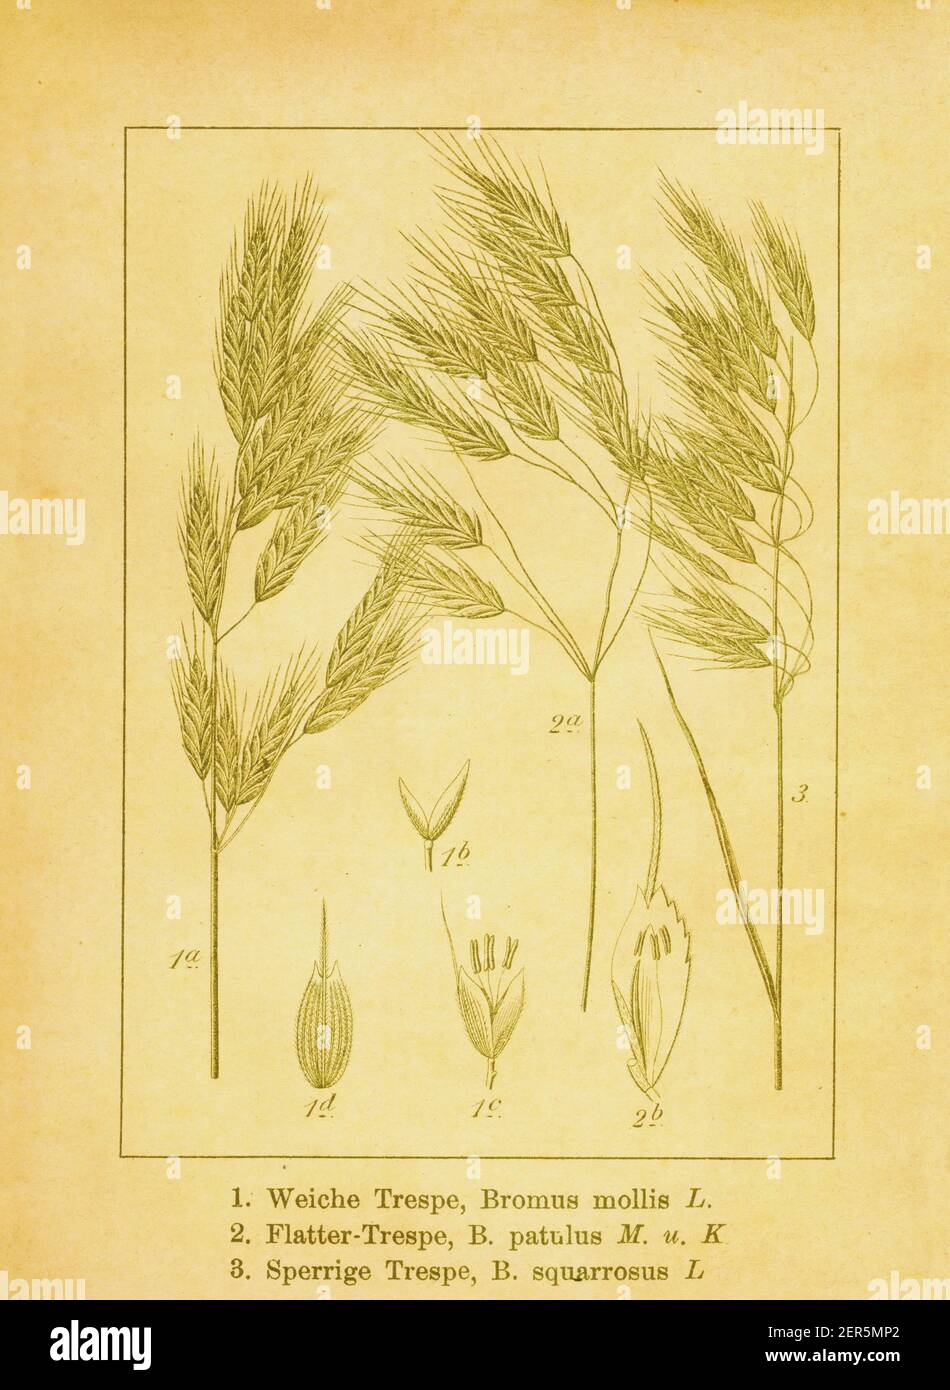 19th-century illustration of soft brome, Japanese brome and corn brome. Engraving by Jacob Sturm (1771-1848) from the book Deutschlands Flora in Abbil Stock Photo